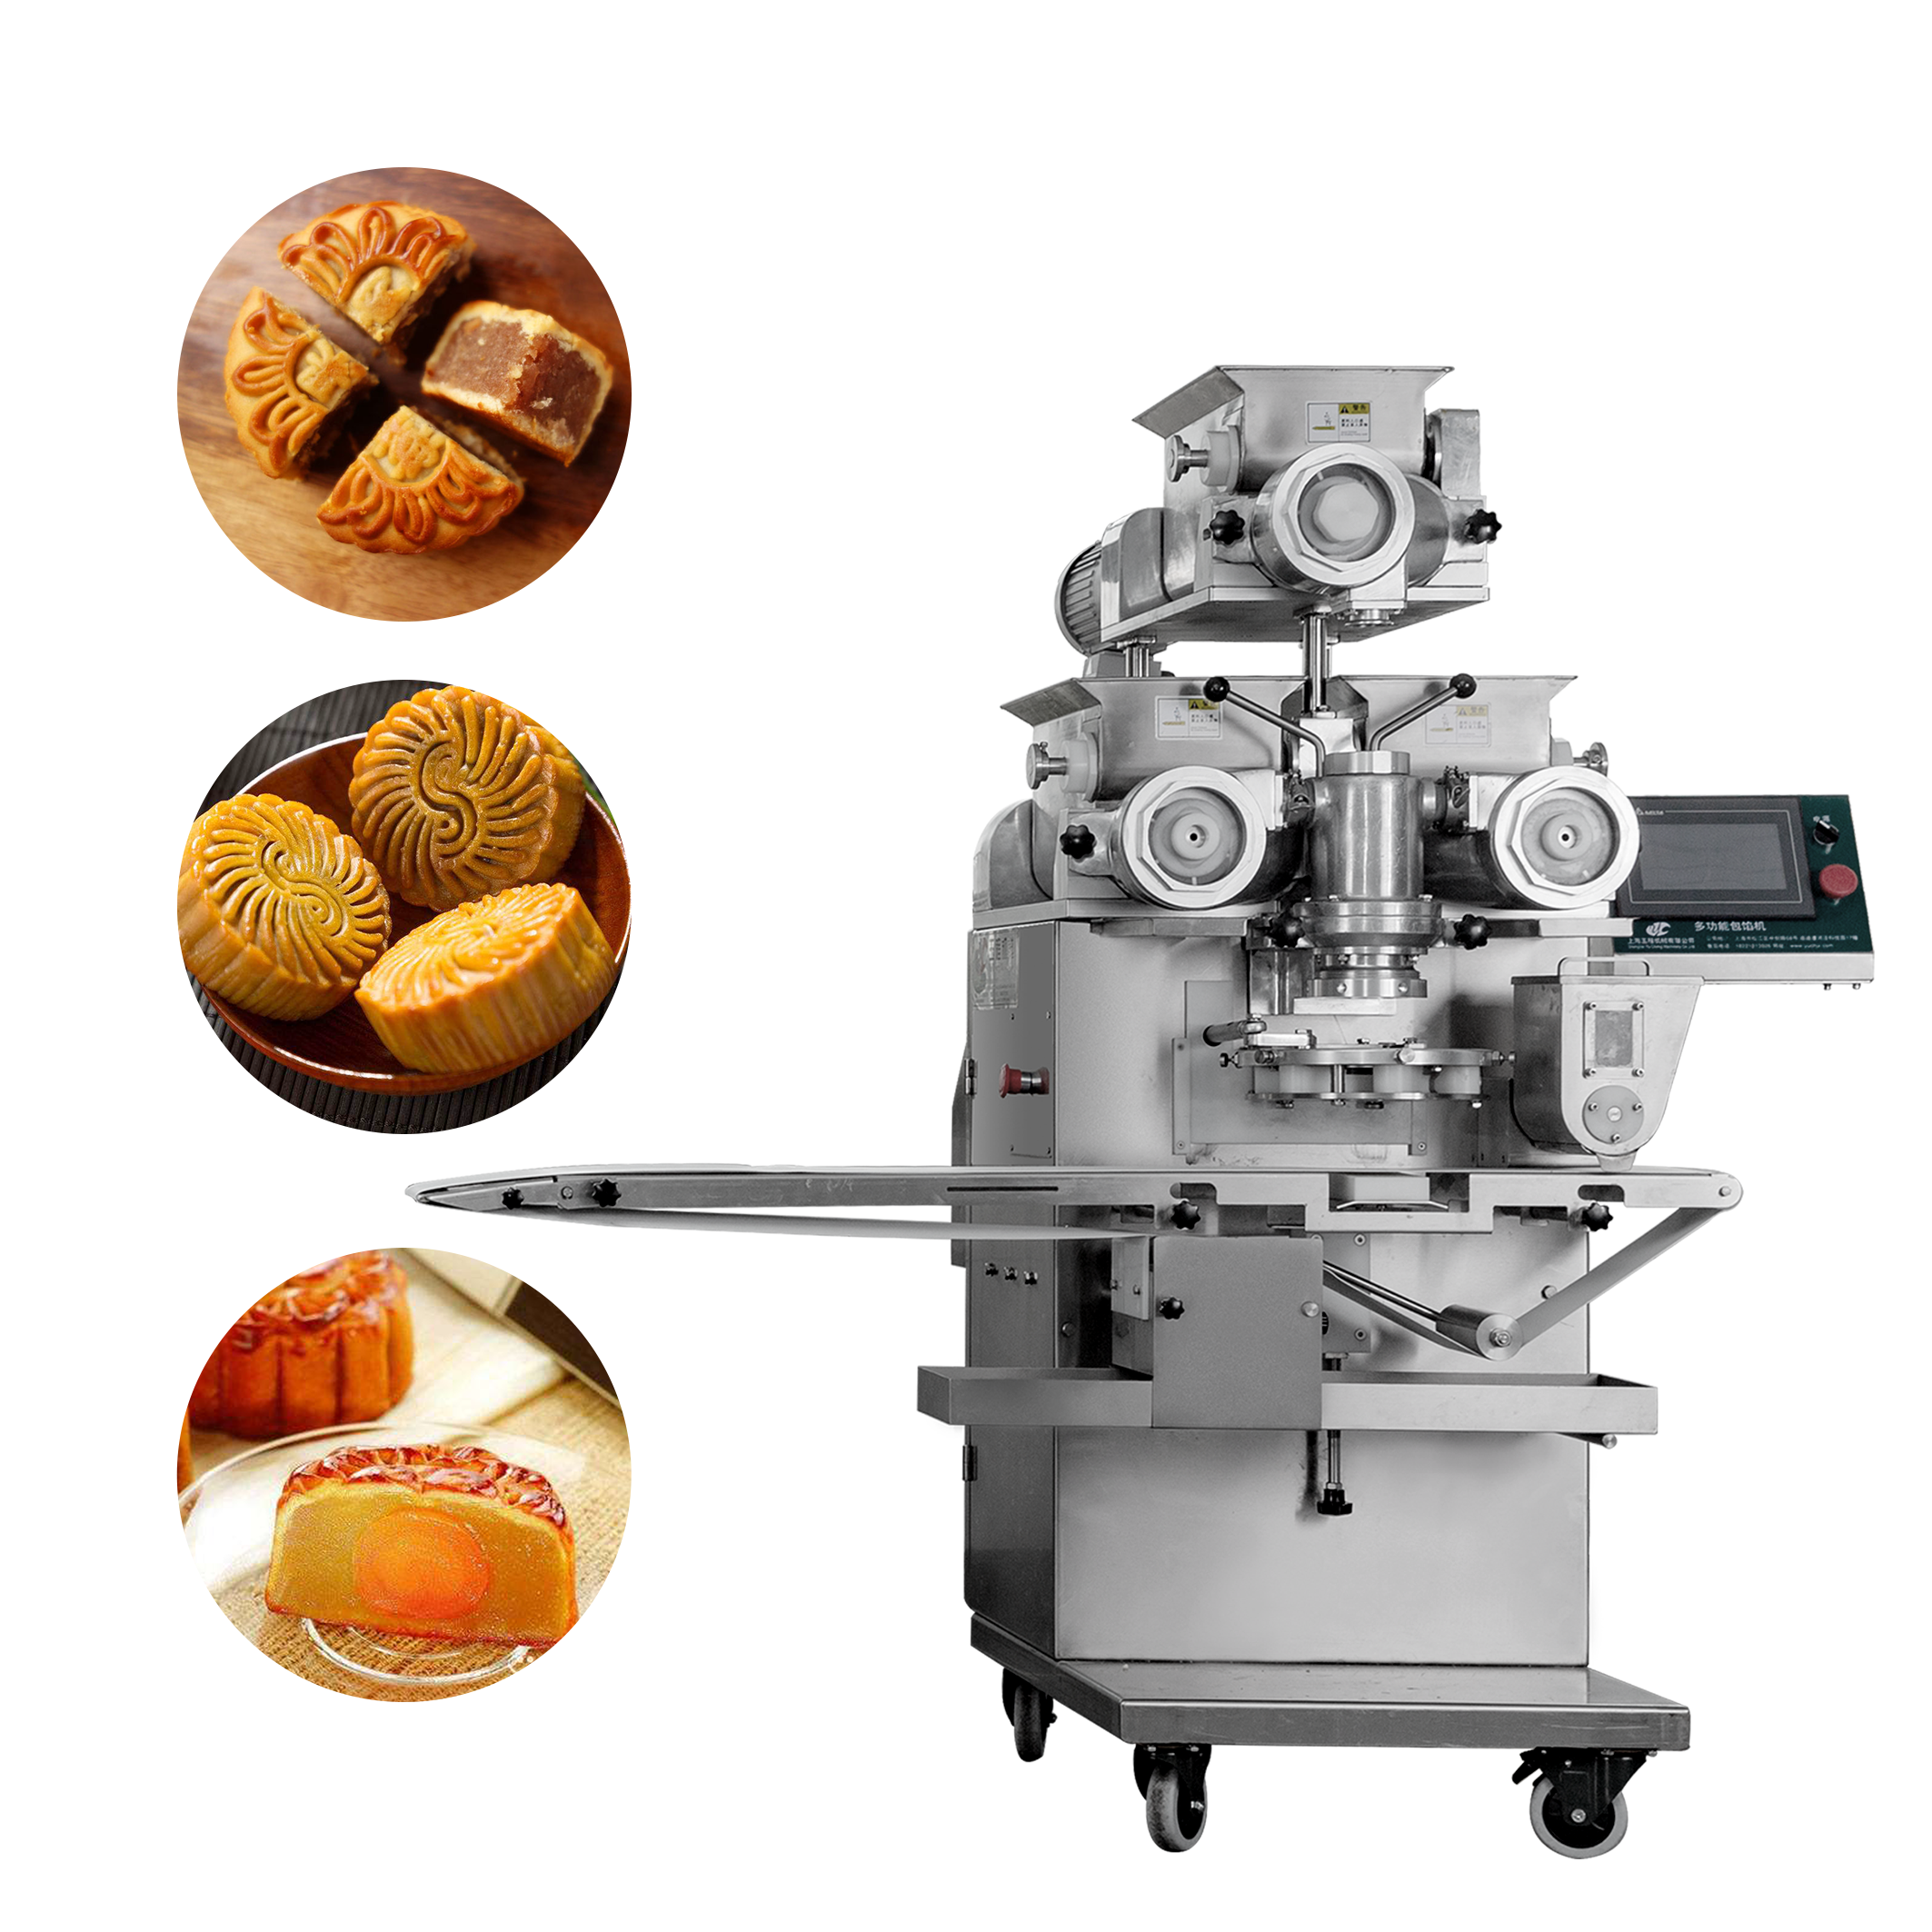 Multifuctional moon cake encrusting machine stamping machine production line Featured Image